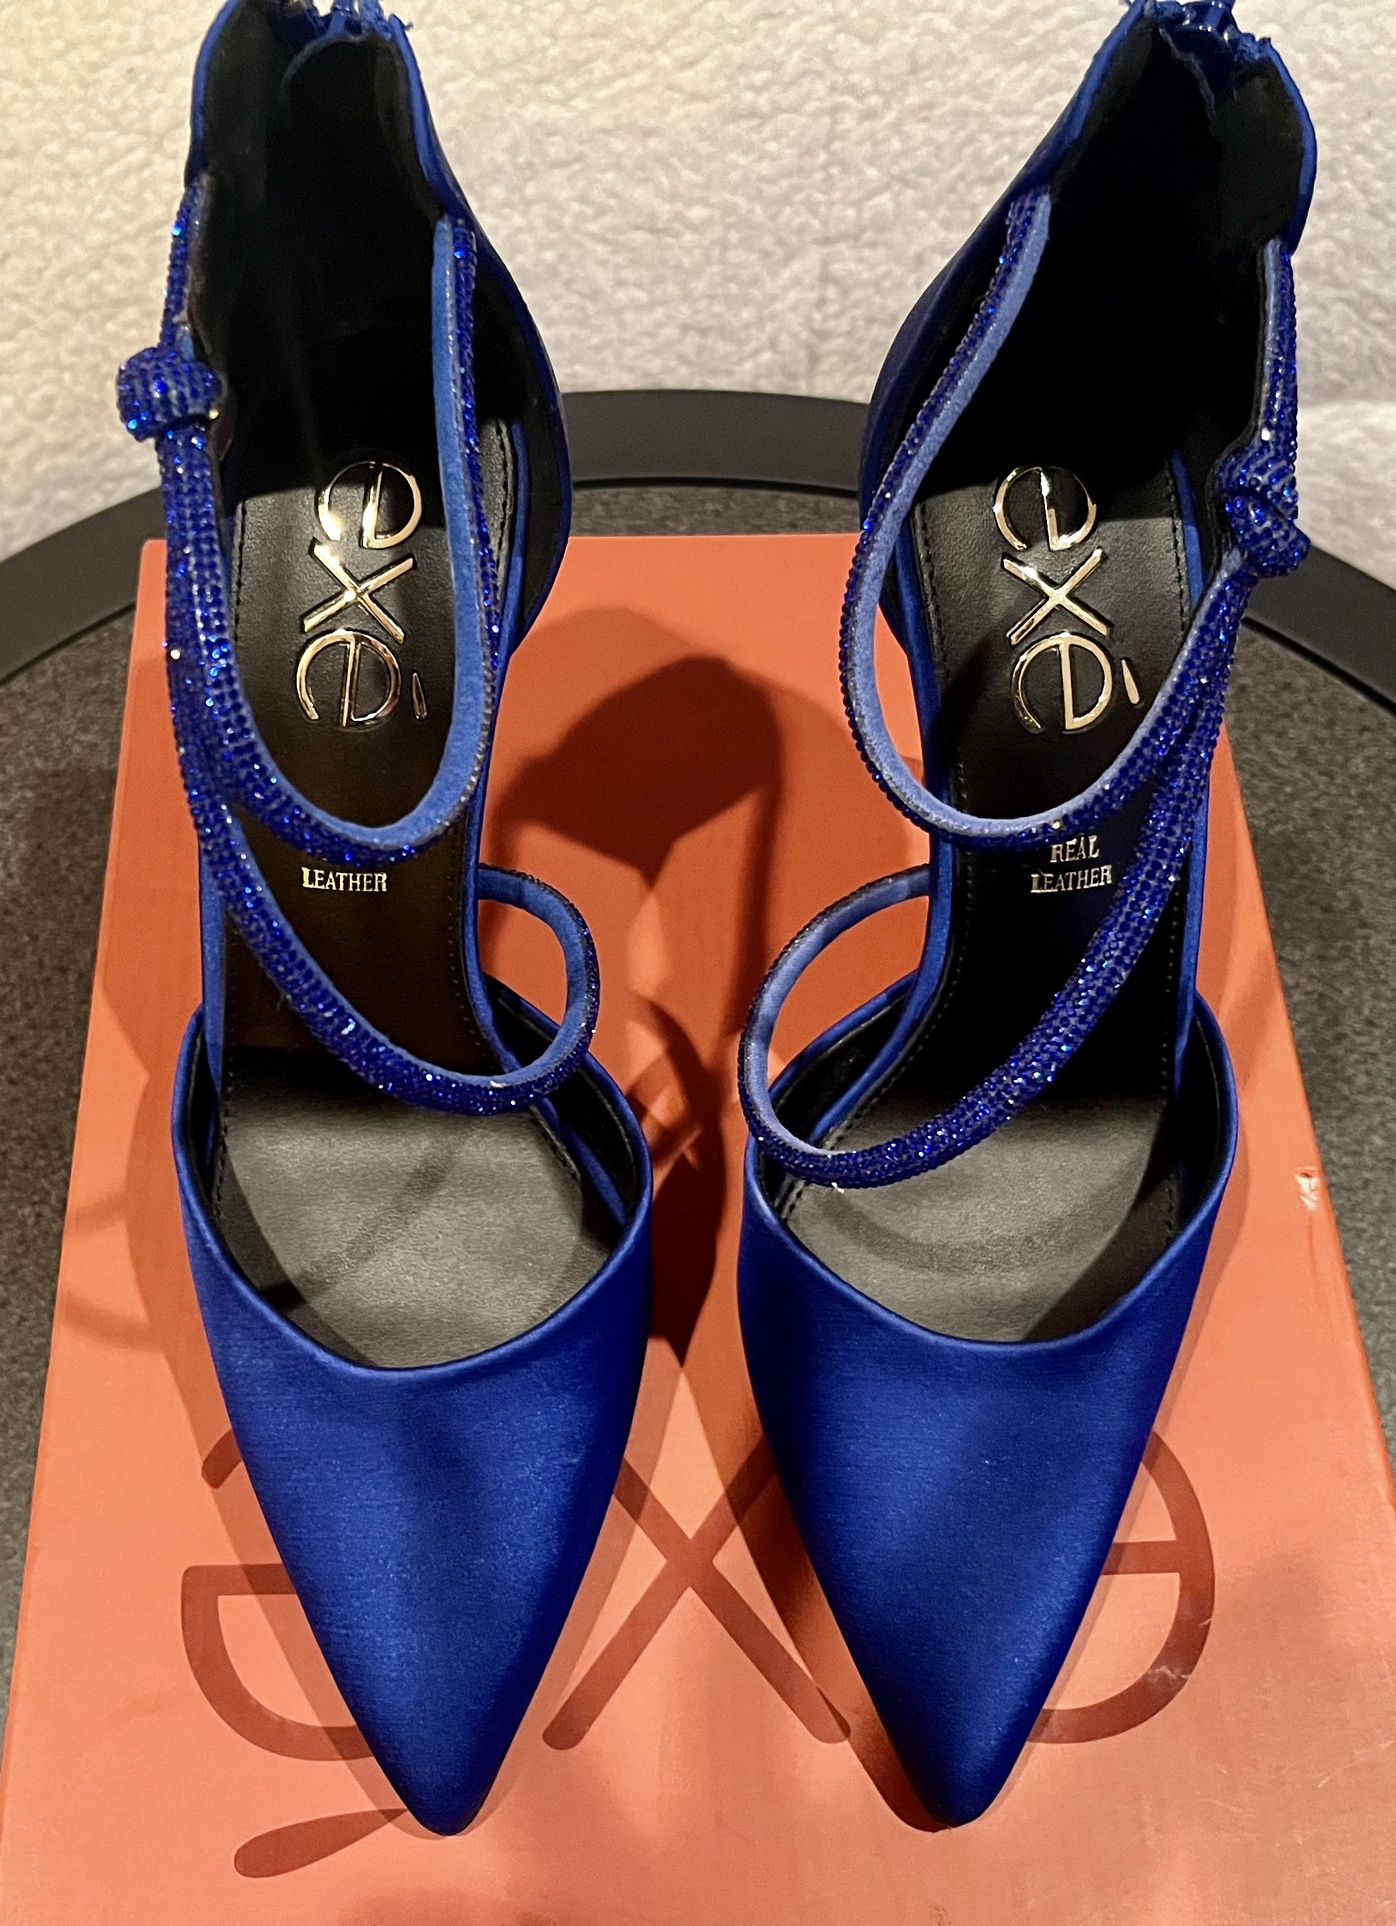 NWOT exe Electric Blue Jessica-985  4” Heels Size 37